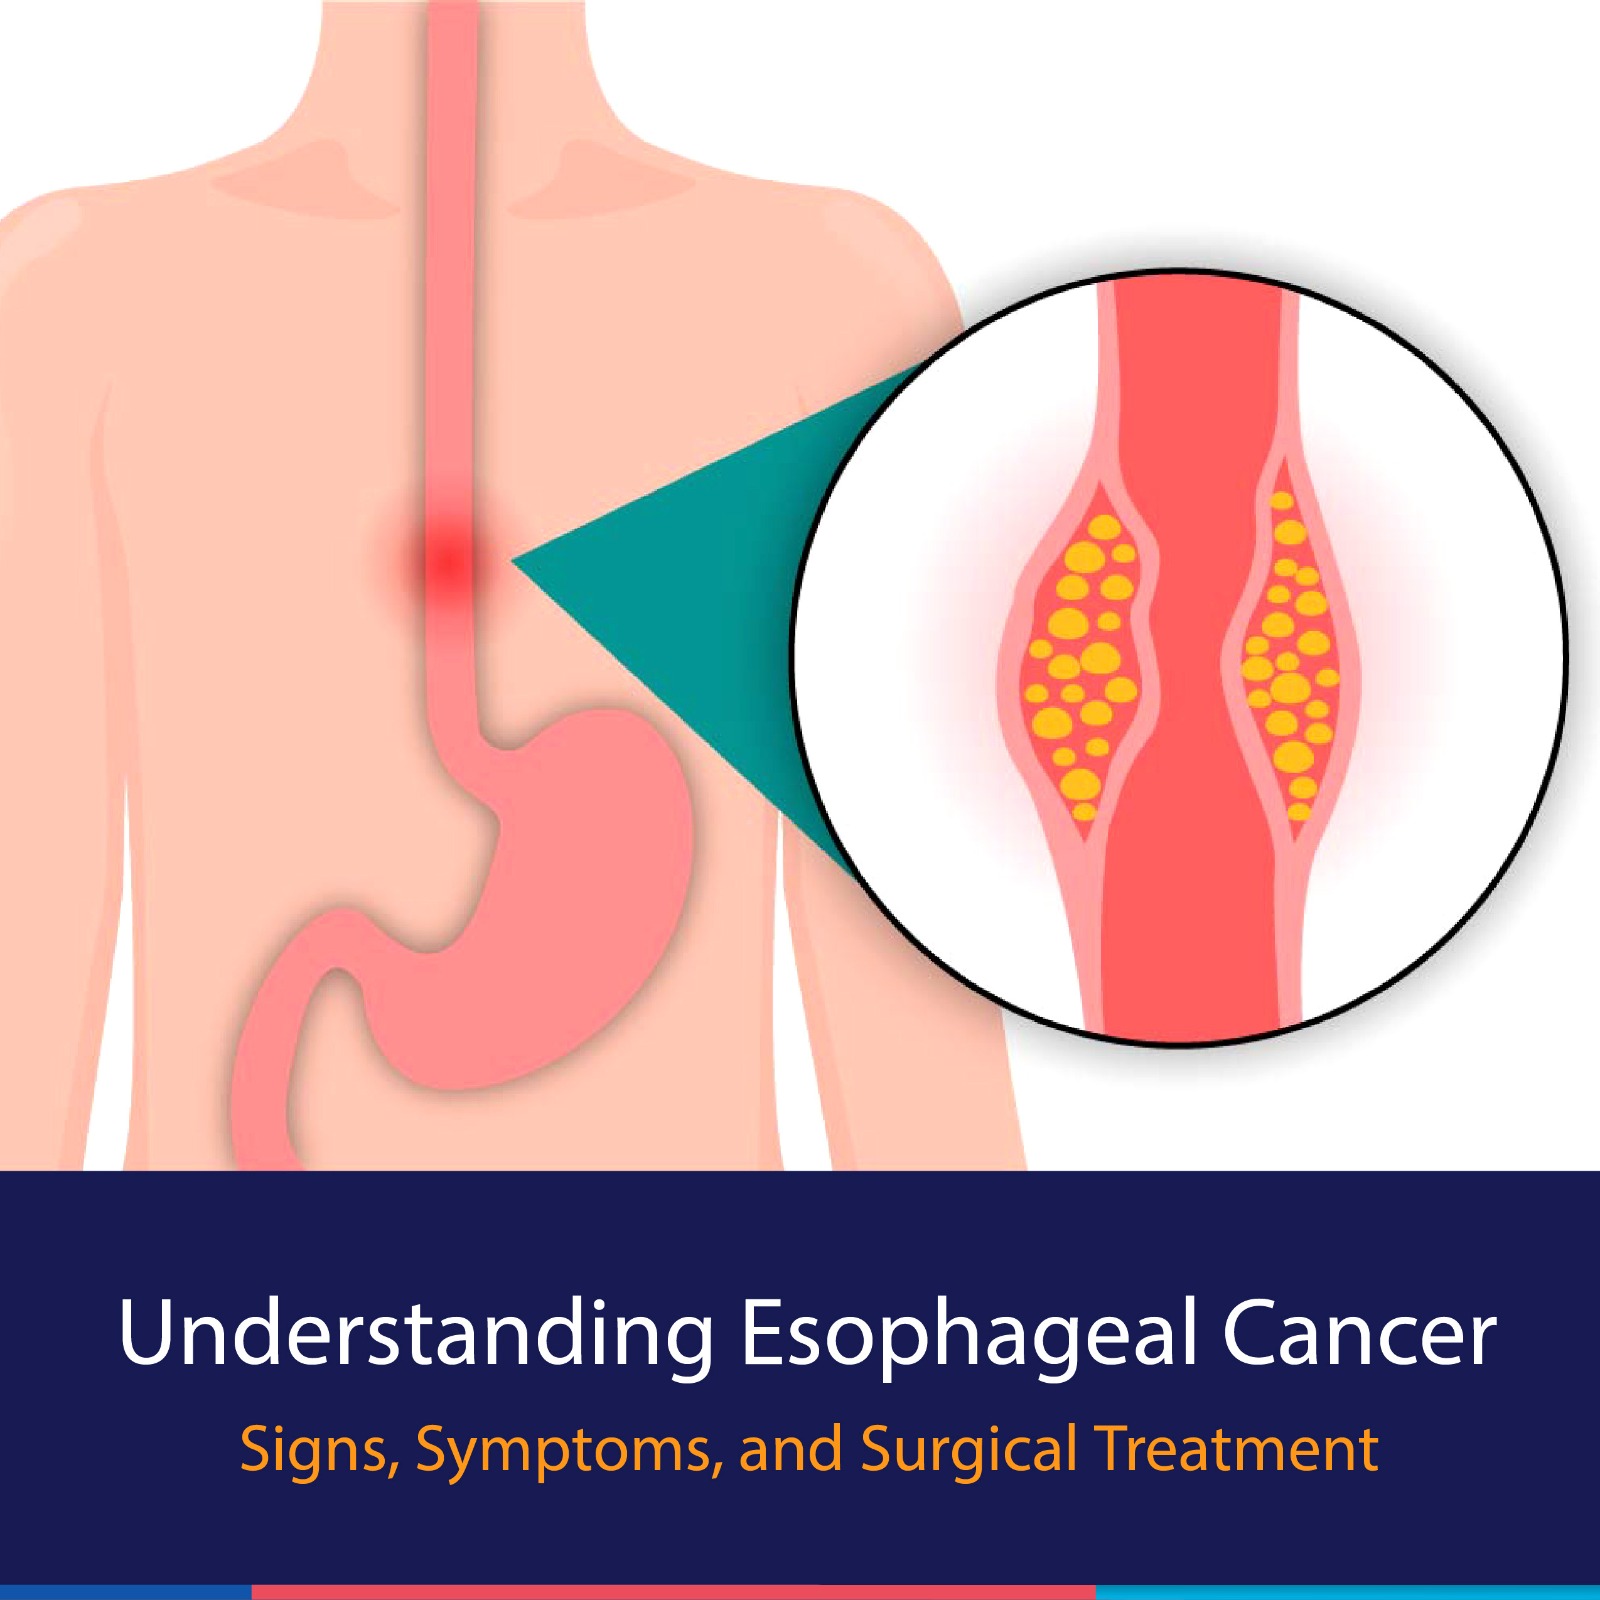 Understanding Esophageal Cancer: Signs, Symptoms, and Surgical Treatment